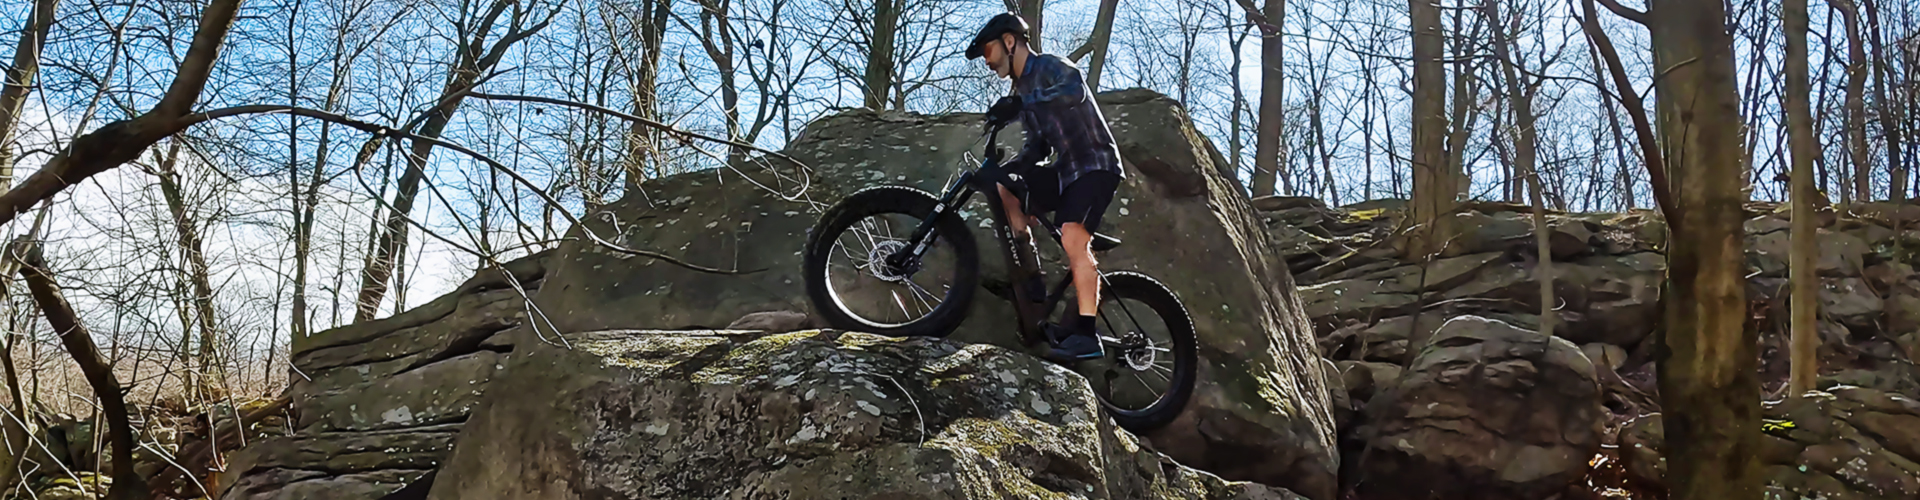 Mountain Bike Mindset: Tips to tackle technical trails, drops, slabs and skinnies